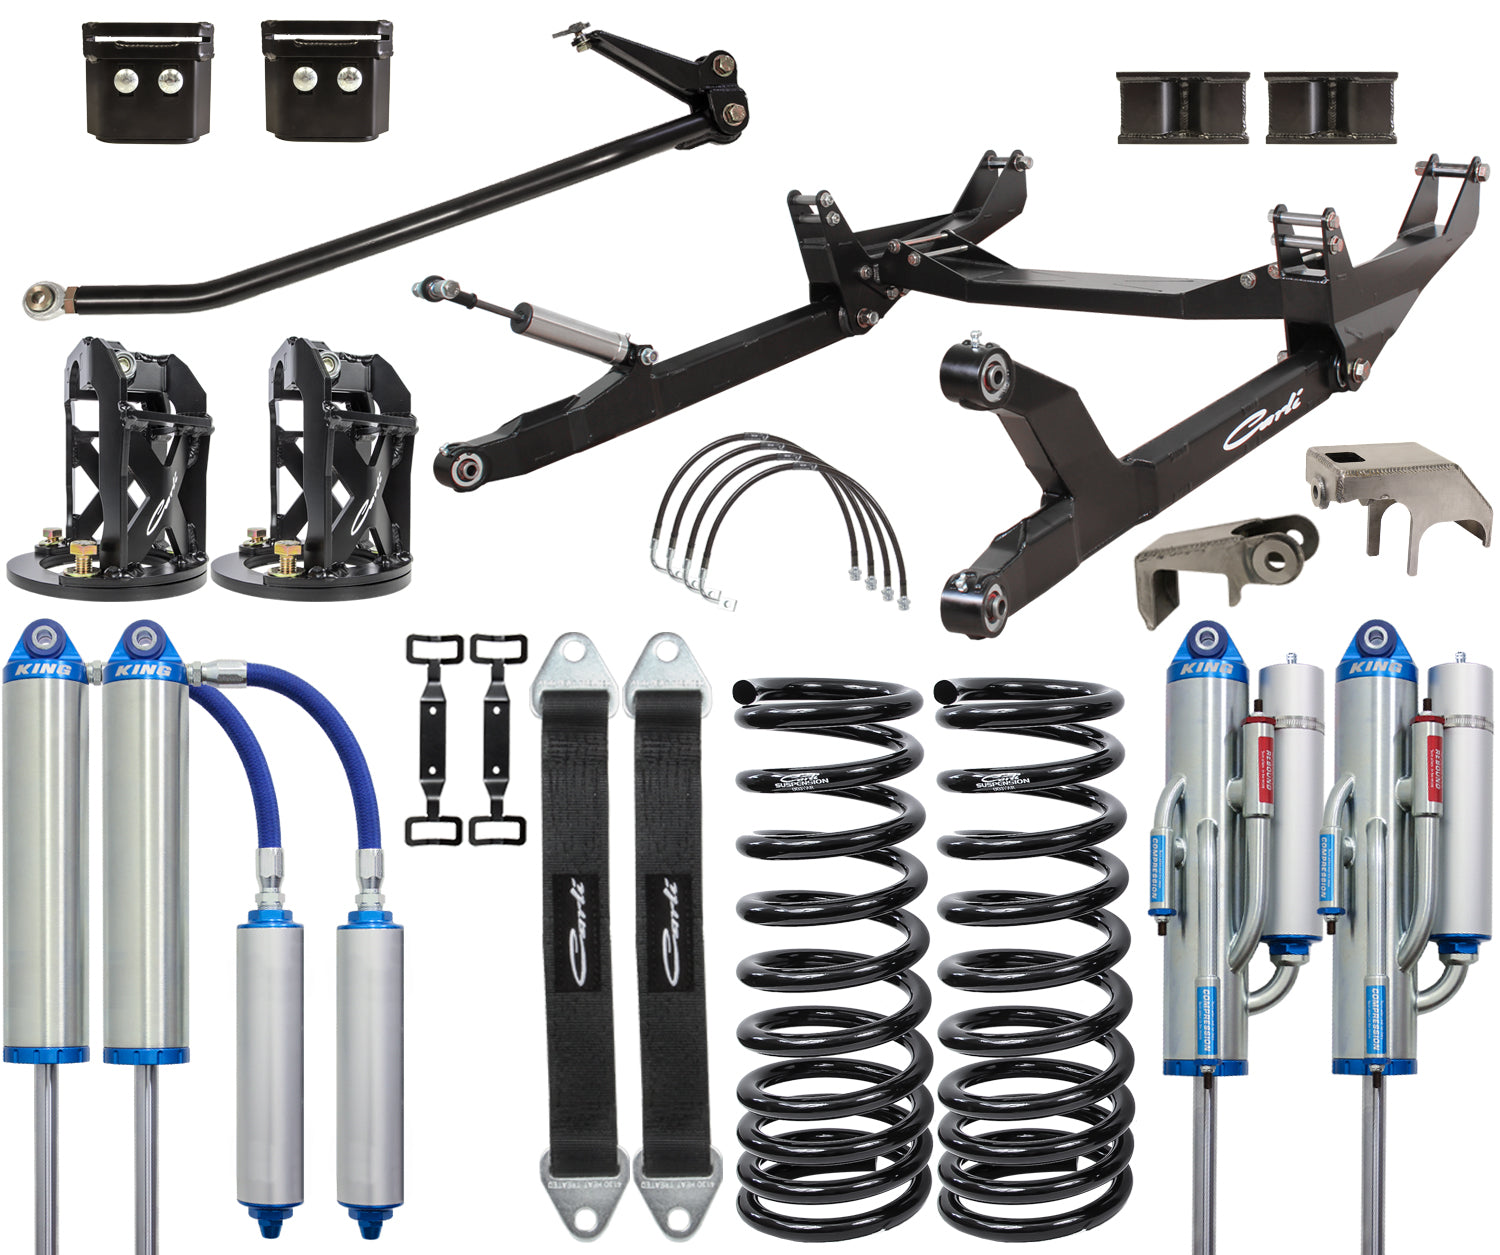 Carli Suspension CS-DUC35-6-03 6.0 inch Lift Unchained System